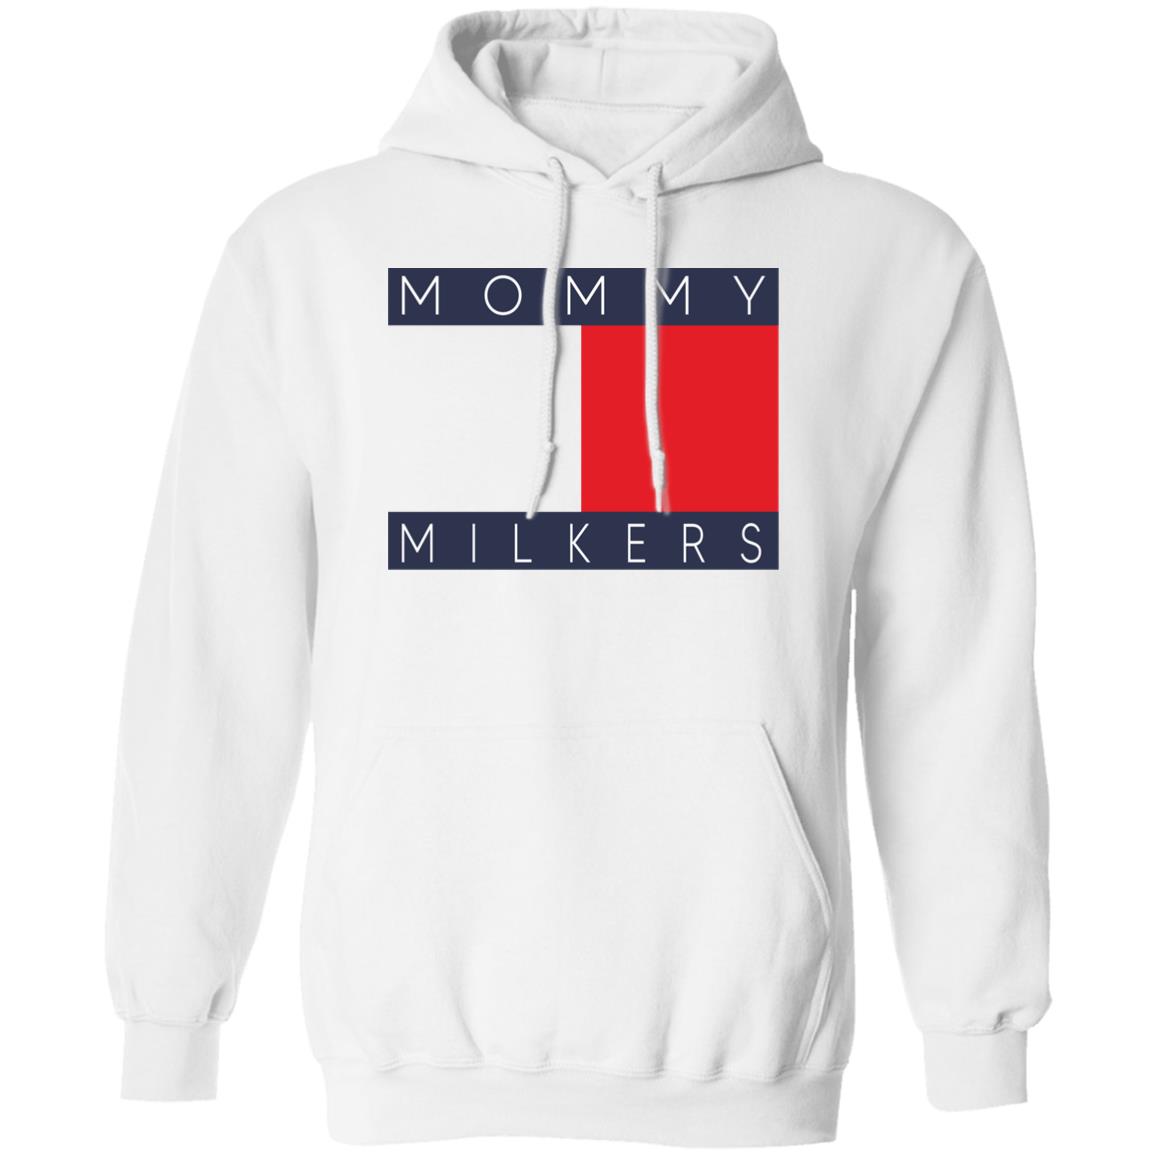 Mommy Milkers Shirt 1